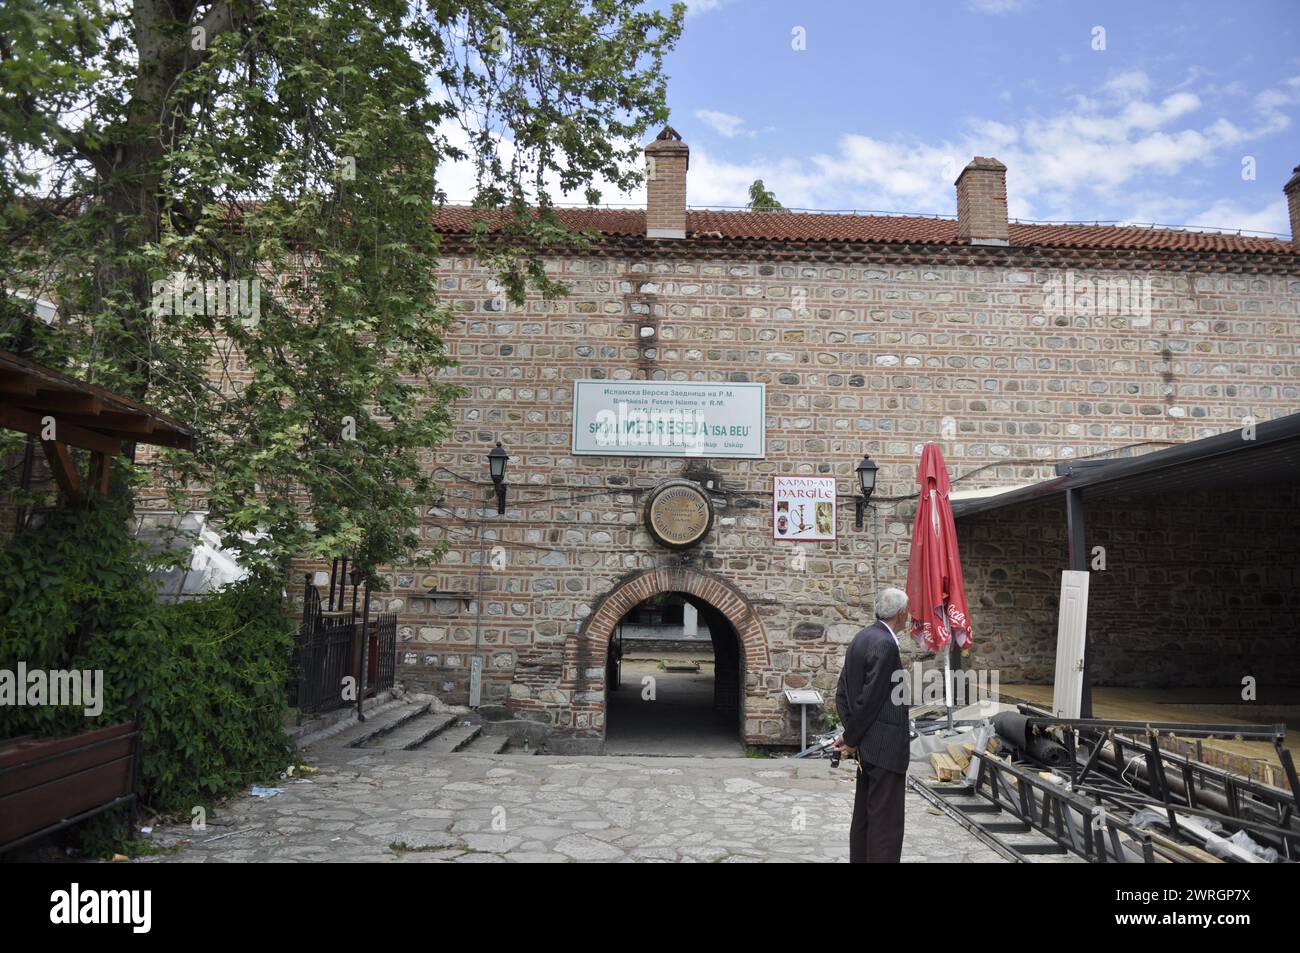 Old Bazaar in Skopje, Turkish bazaar. As one of the oldest marketplaces in the Balkans, it has been  center for trade since at least the 12th century. Stock Photo